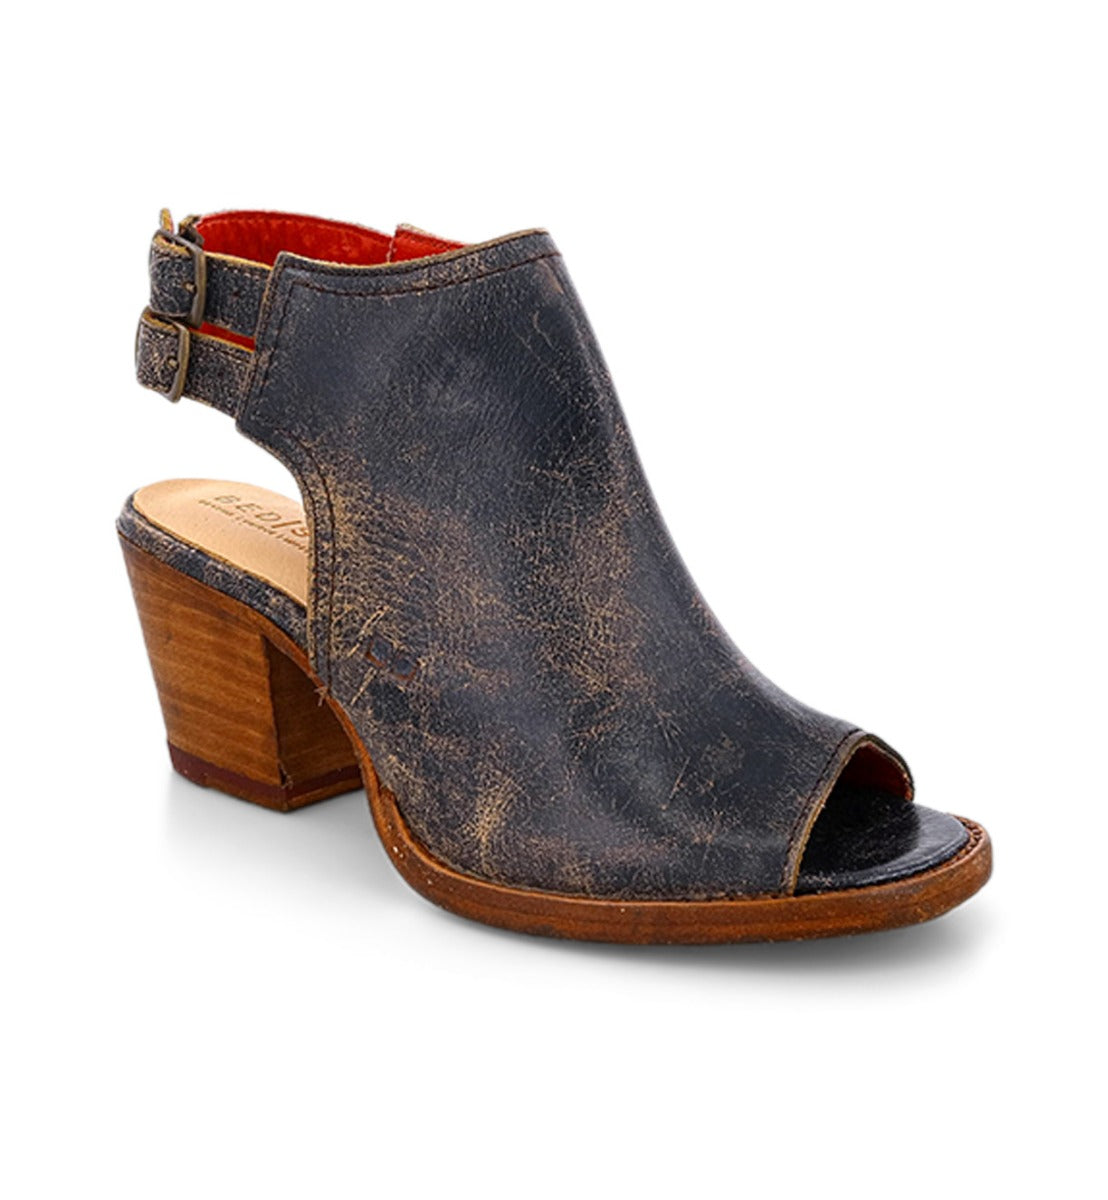 A women's black leather Ireni bootie with a wooden heel by Bed Stu.